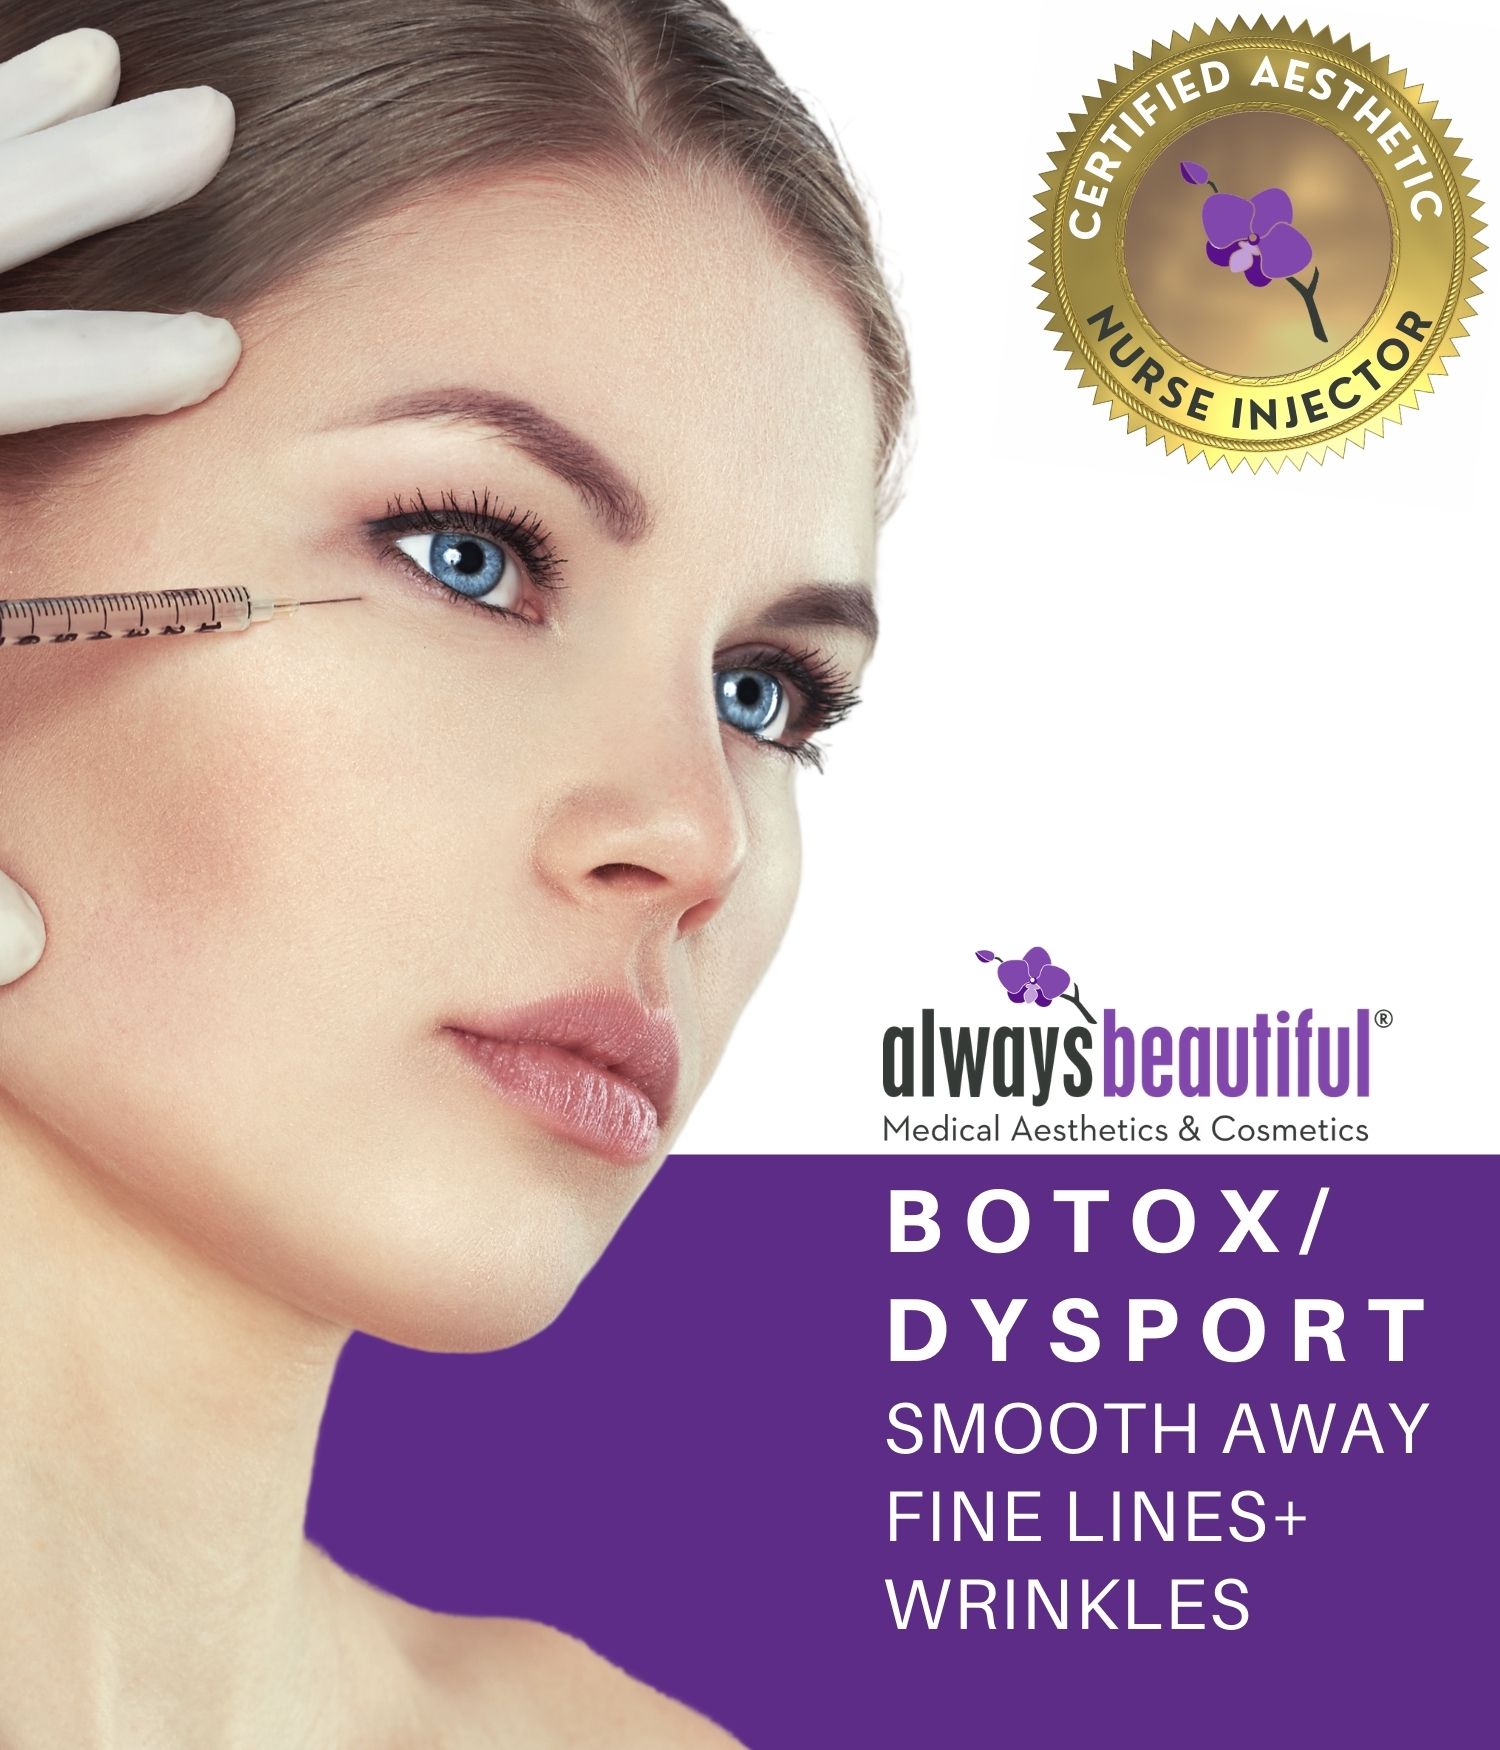 Woman receiving botox and dysport from a skilled injector at Always Beautiful.